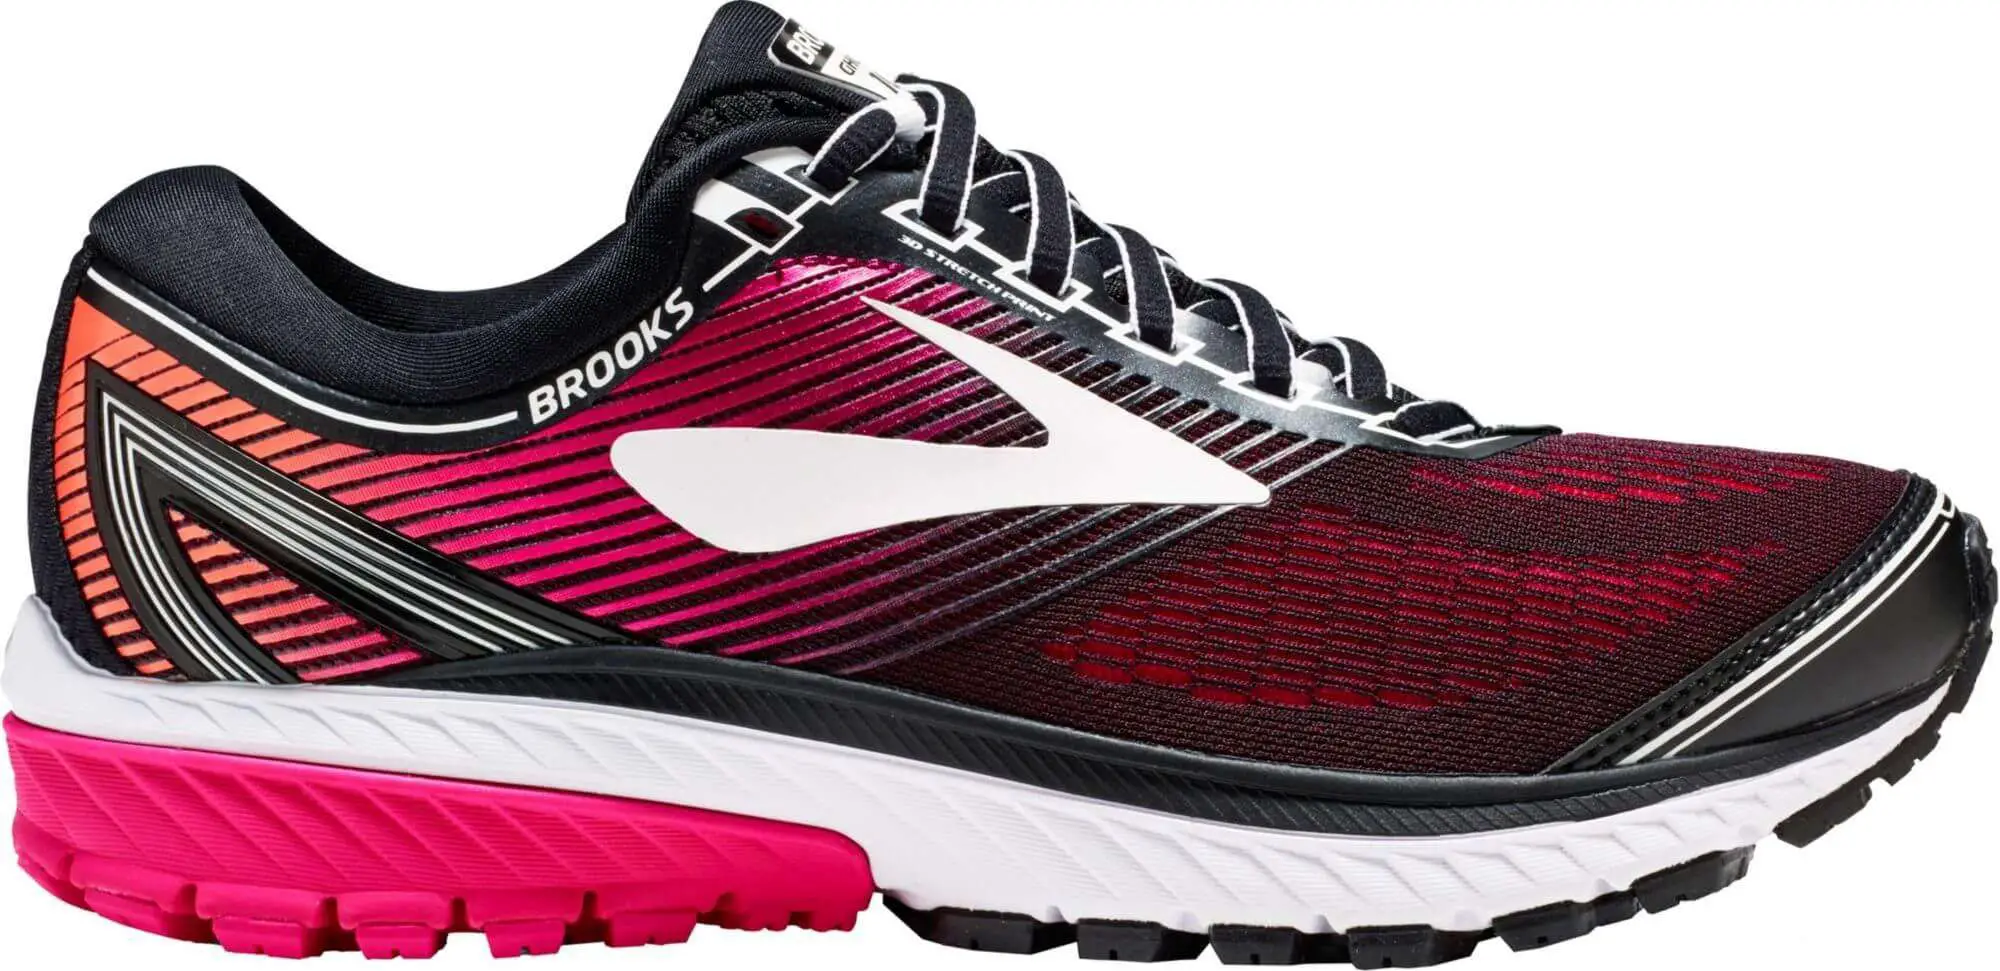 The Best Running Shoes For Wide Feet Reviewed In 2018 ...